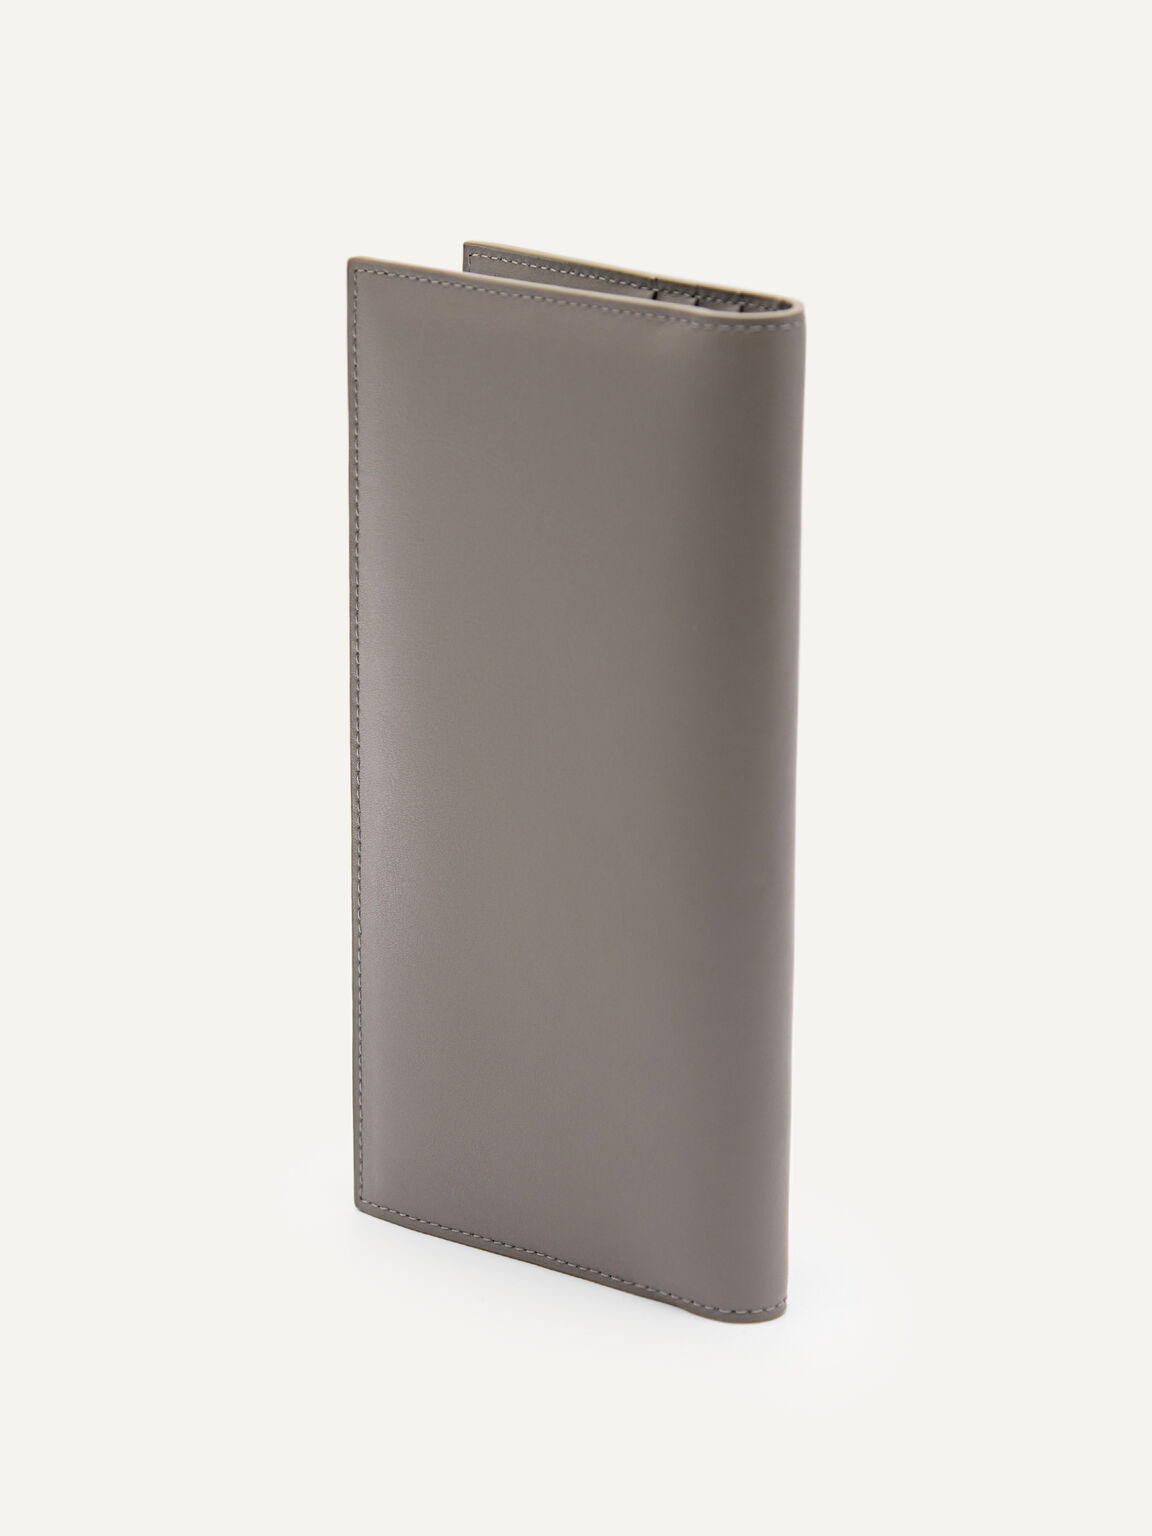 Leather Wallet, Taupe